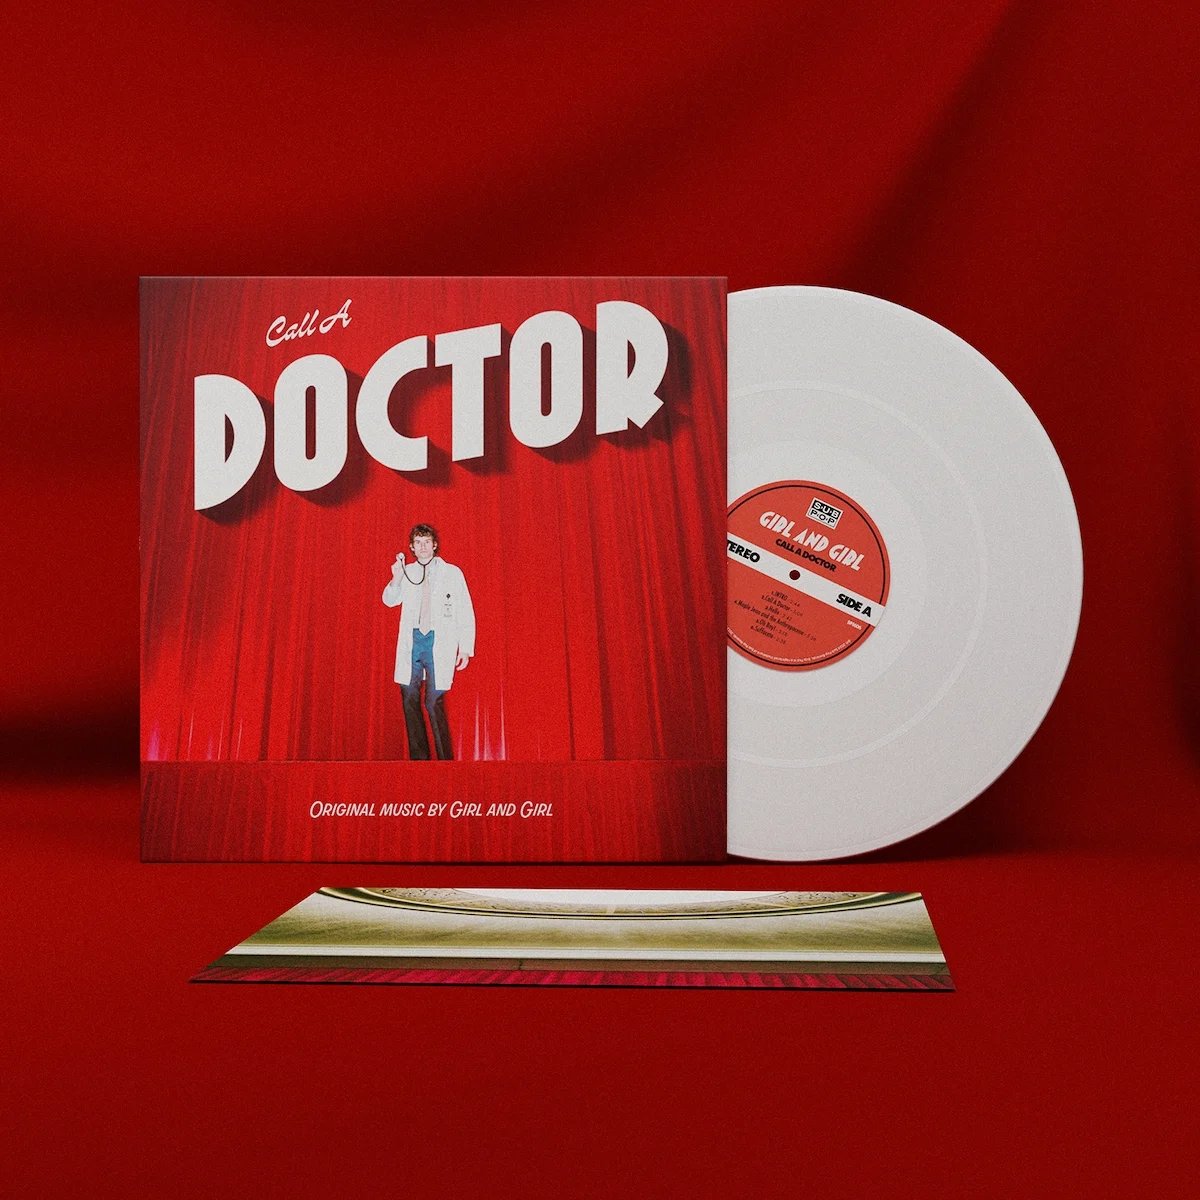 JUST IN! 'Call A Doctor' by Girl and Girl Driven indie rock, post-punk, and garage rock meldings from the Australian group. Their debut album is released tomorrow through Sub Pop. @GirlandgirlM @subpop normanrecords.com/records/201943…